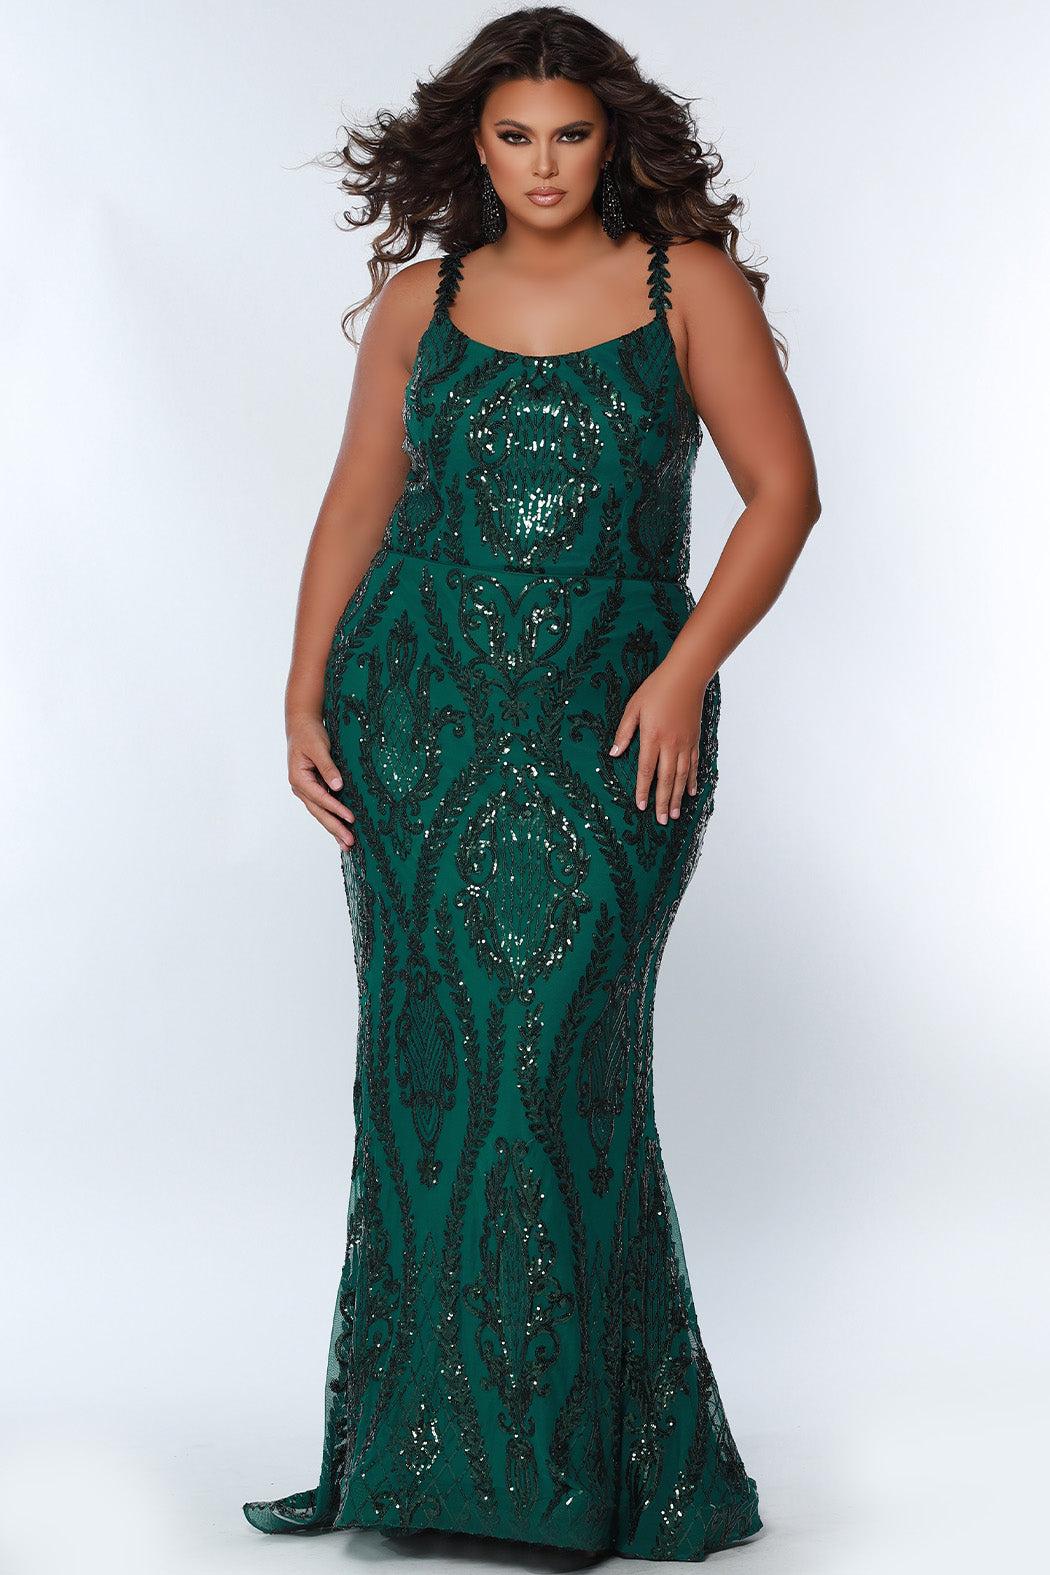 Sydney's Closet SC7332 Long Fitted Sequin Formal Plus Size Prom Dress Evening Gown. Feel like a star in Sydney's Closet SC7332 Long Fitted Sequin Formal Plus Size Prom Dress Evening Gown! This glamorous evening dress will have all eyes on you as its sequins glint and sparkle and fitting design bewitch. Let your inner diva out and rock the night away!